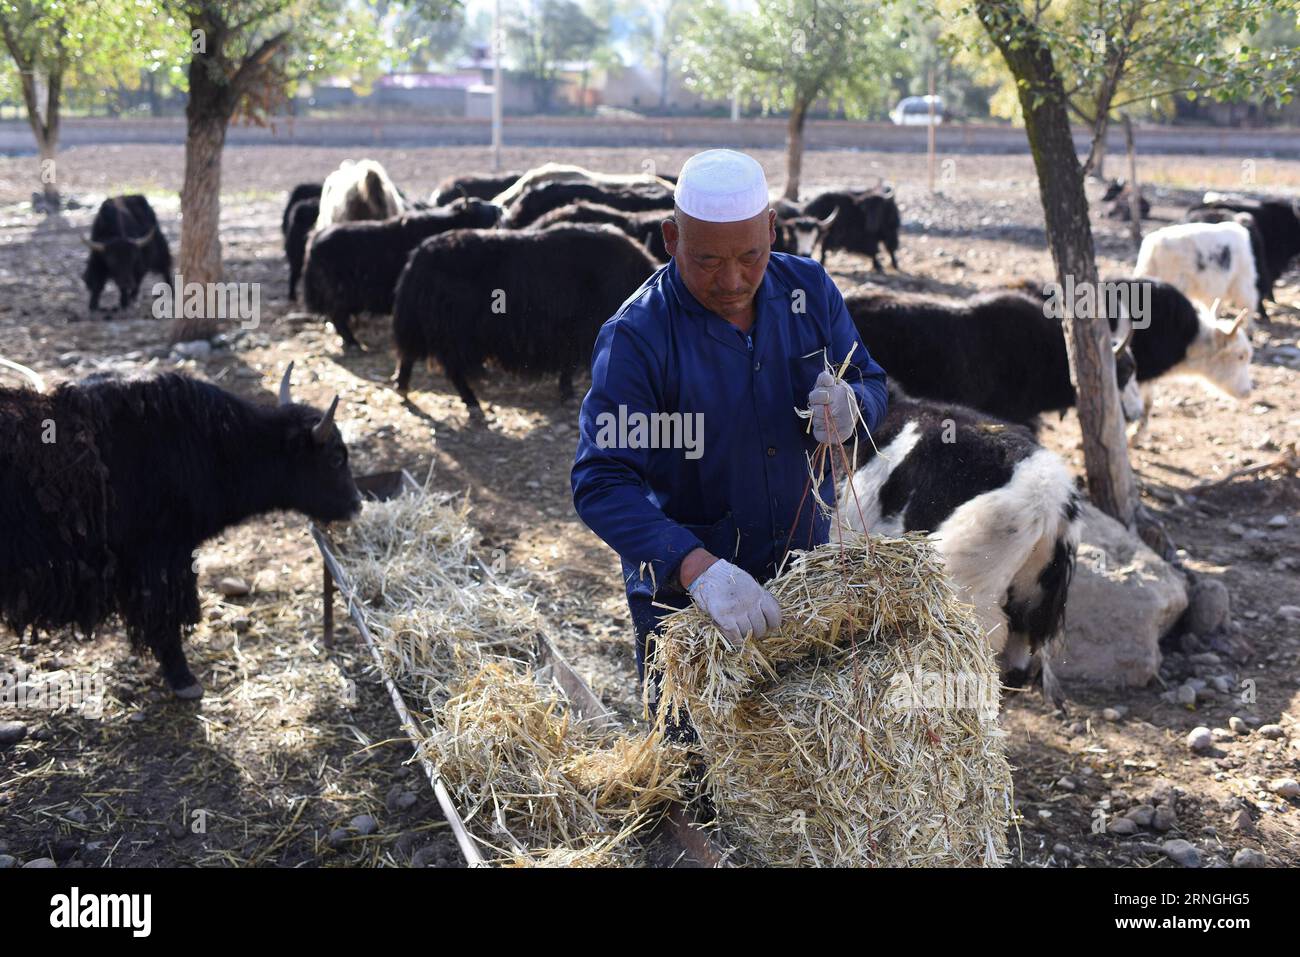 (160930) -- QILIAN, Sept. 30, 2016 -- Zhao Xuewen settles feedstuffs at a livestock-breeding cooperative in Gezidong Village of Zhamashi Township, Qilian County, northwest China s Qinghai Province, Sept. 28, 2016. Our life will get better and better , the 50-year-old Zhao Xuewen said while looking at his sheep on the hillside in Gezidong. His situation was not so good only a few years ago. In 2012, Zhao suffered a fracture to his leg as he repaired his house. Unfortunately, his wife had three operations in the same year. The successive misfortunes subjected the man of the Hui ethnic group a he Stock Photo